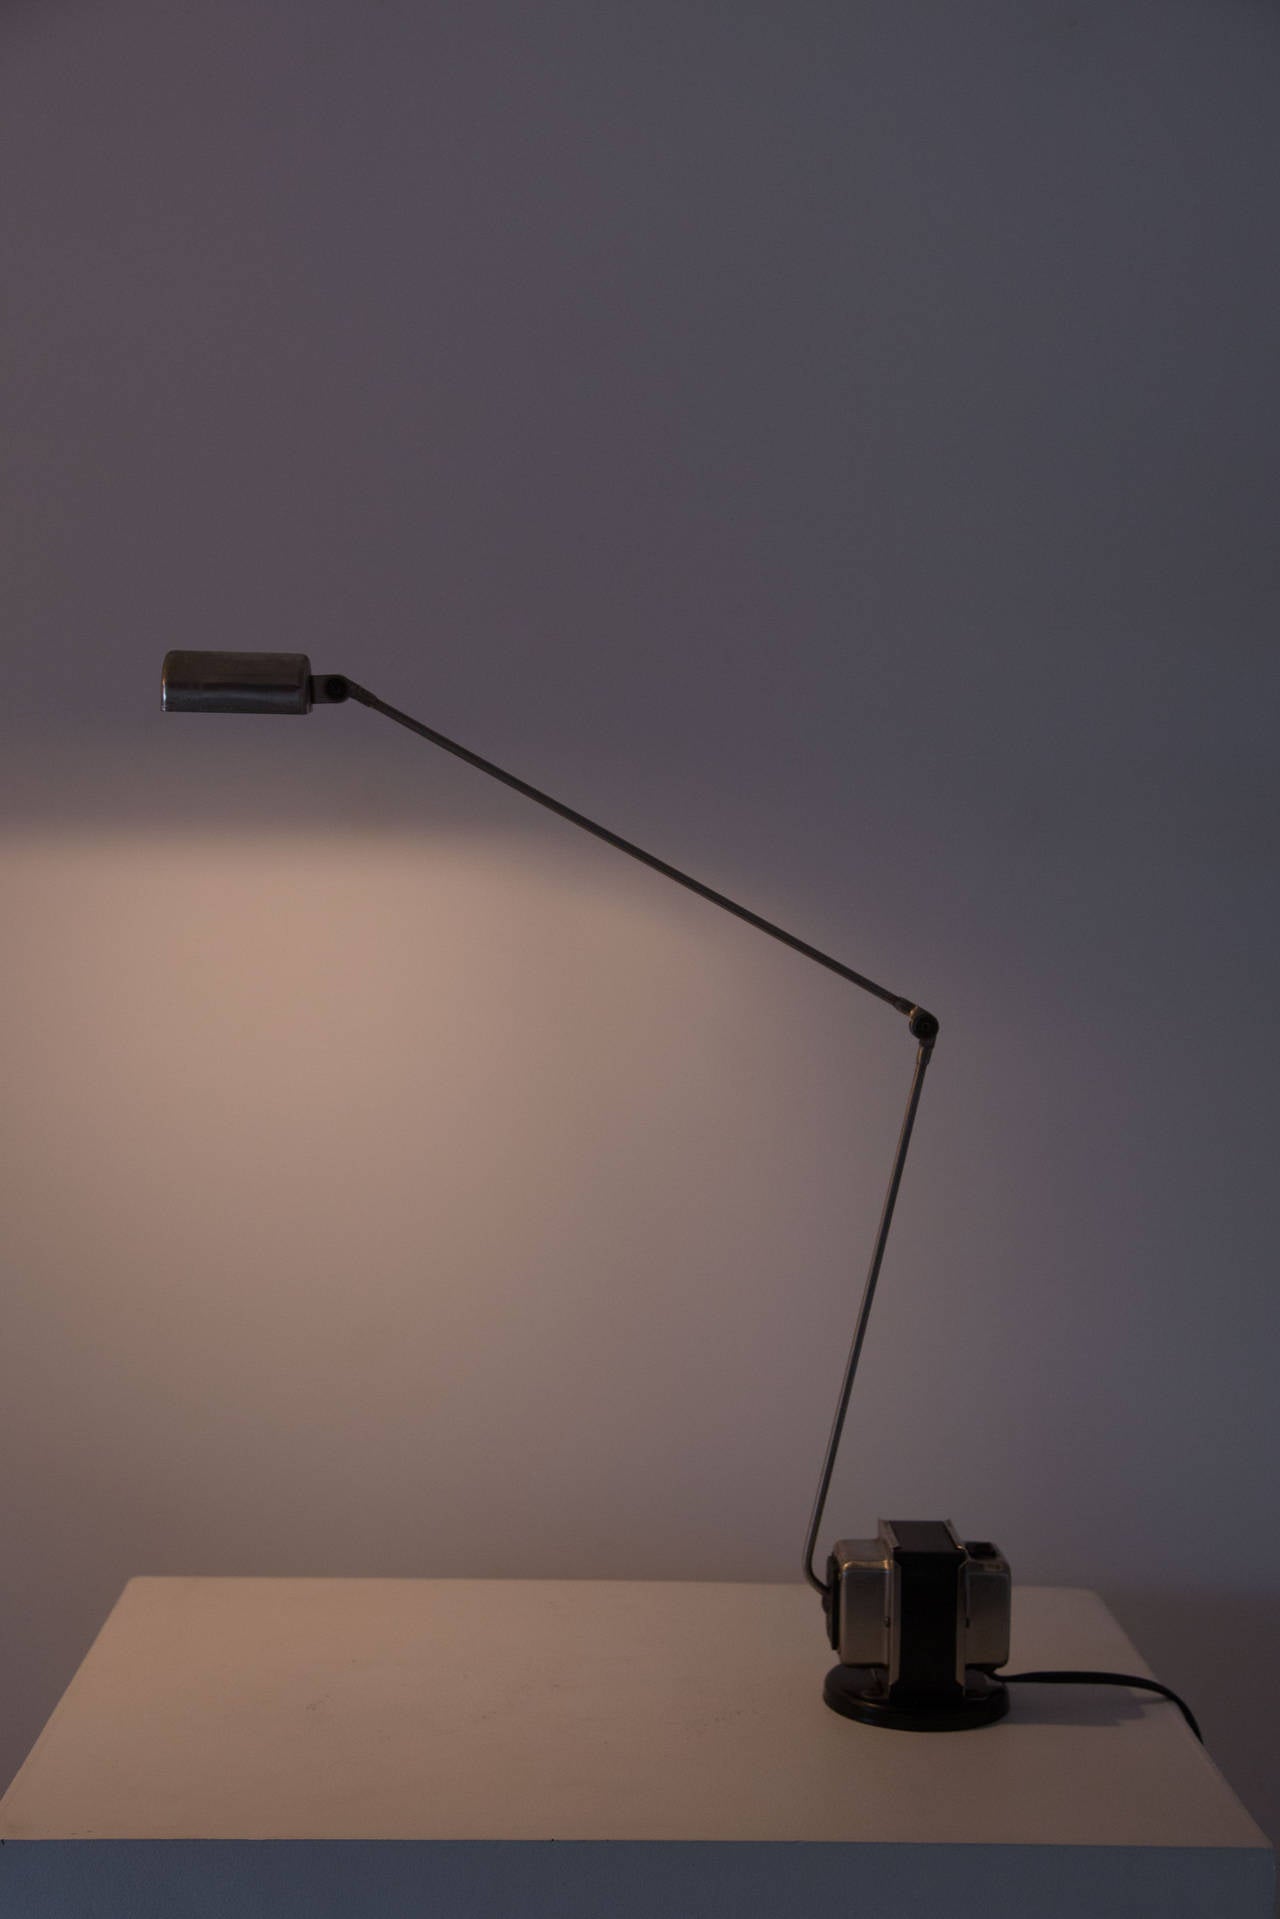 Nickel metal frame, articulated arm and pivoting diffuser by Tommaso Cimini for Lumina.